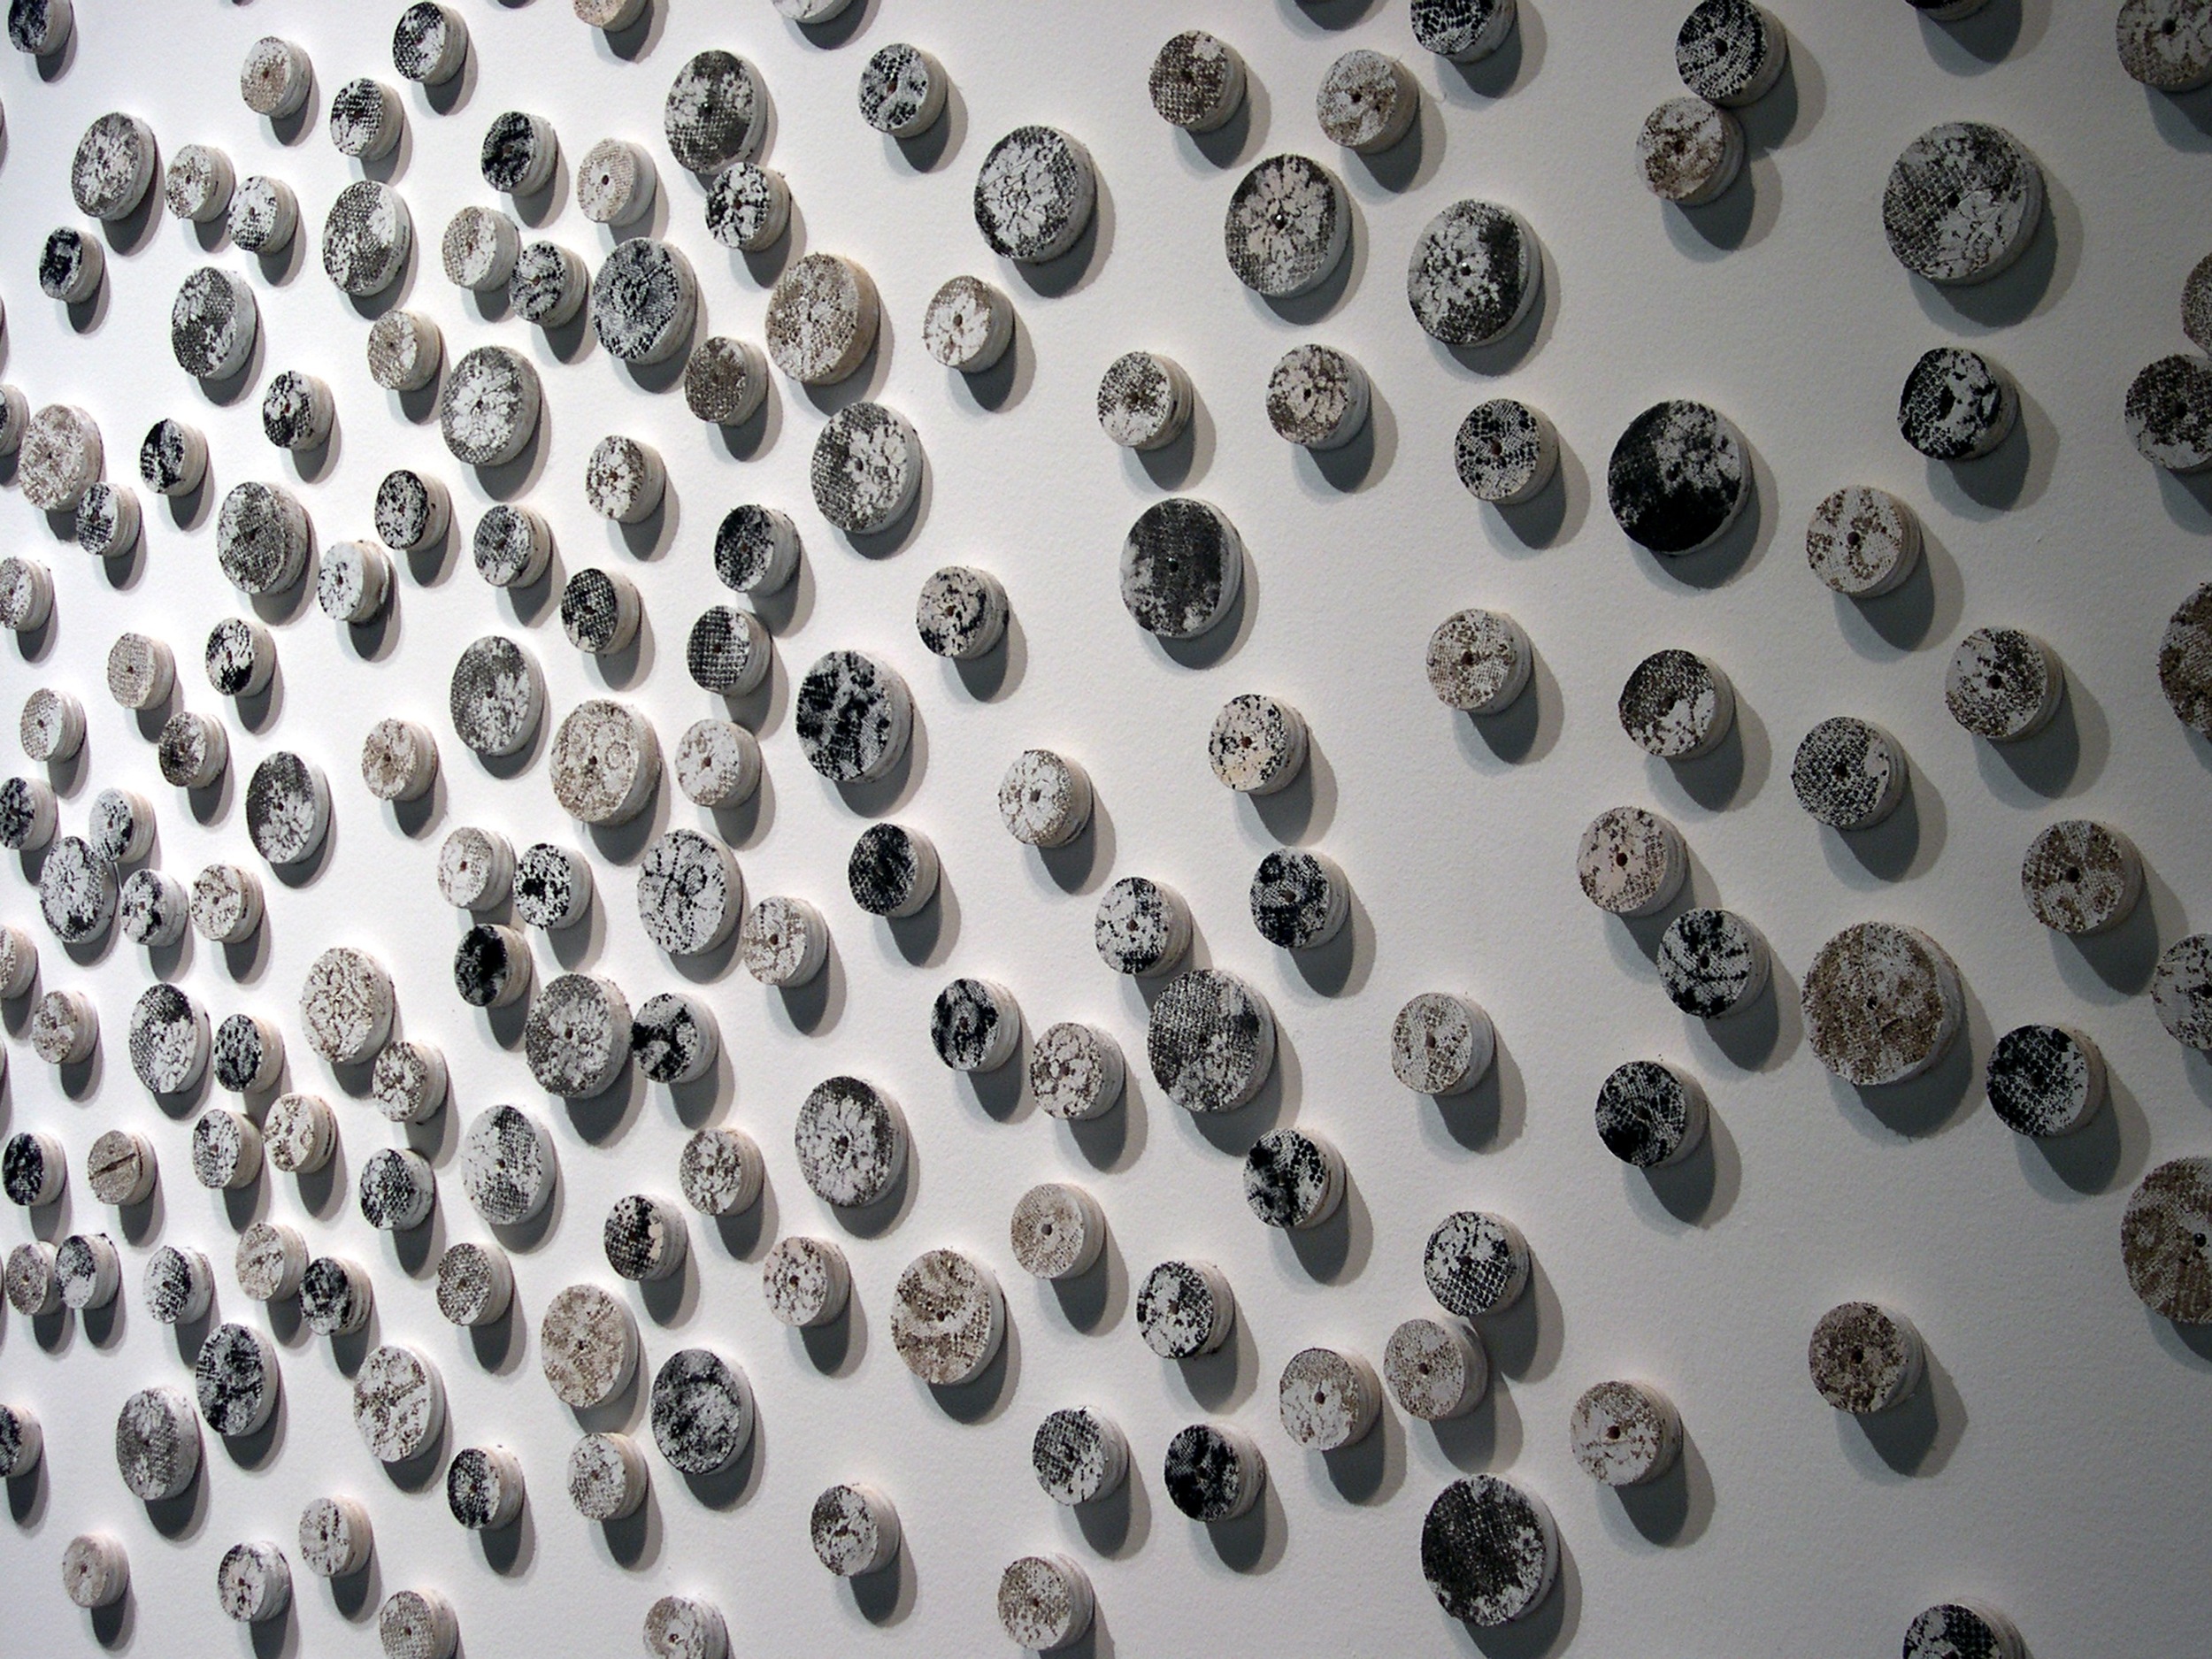   Place and Displace,  2007 Detail, wall installation 